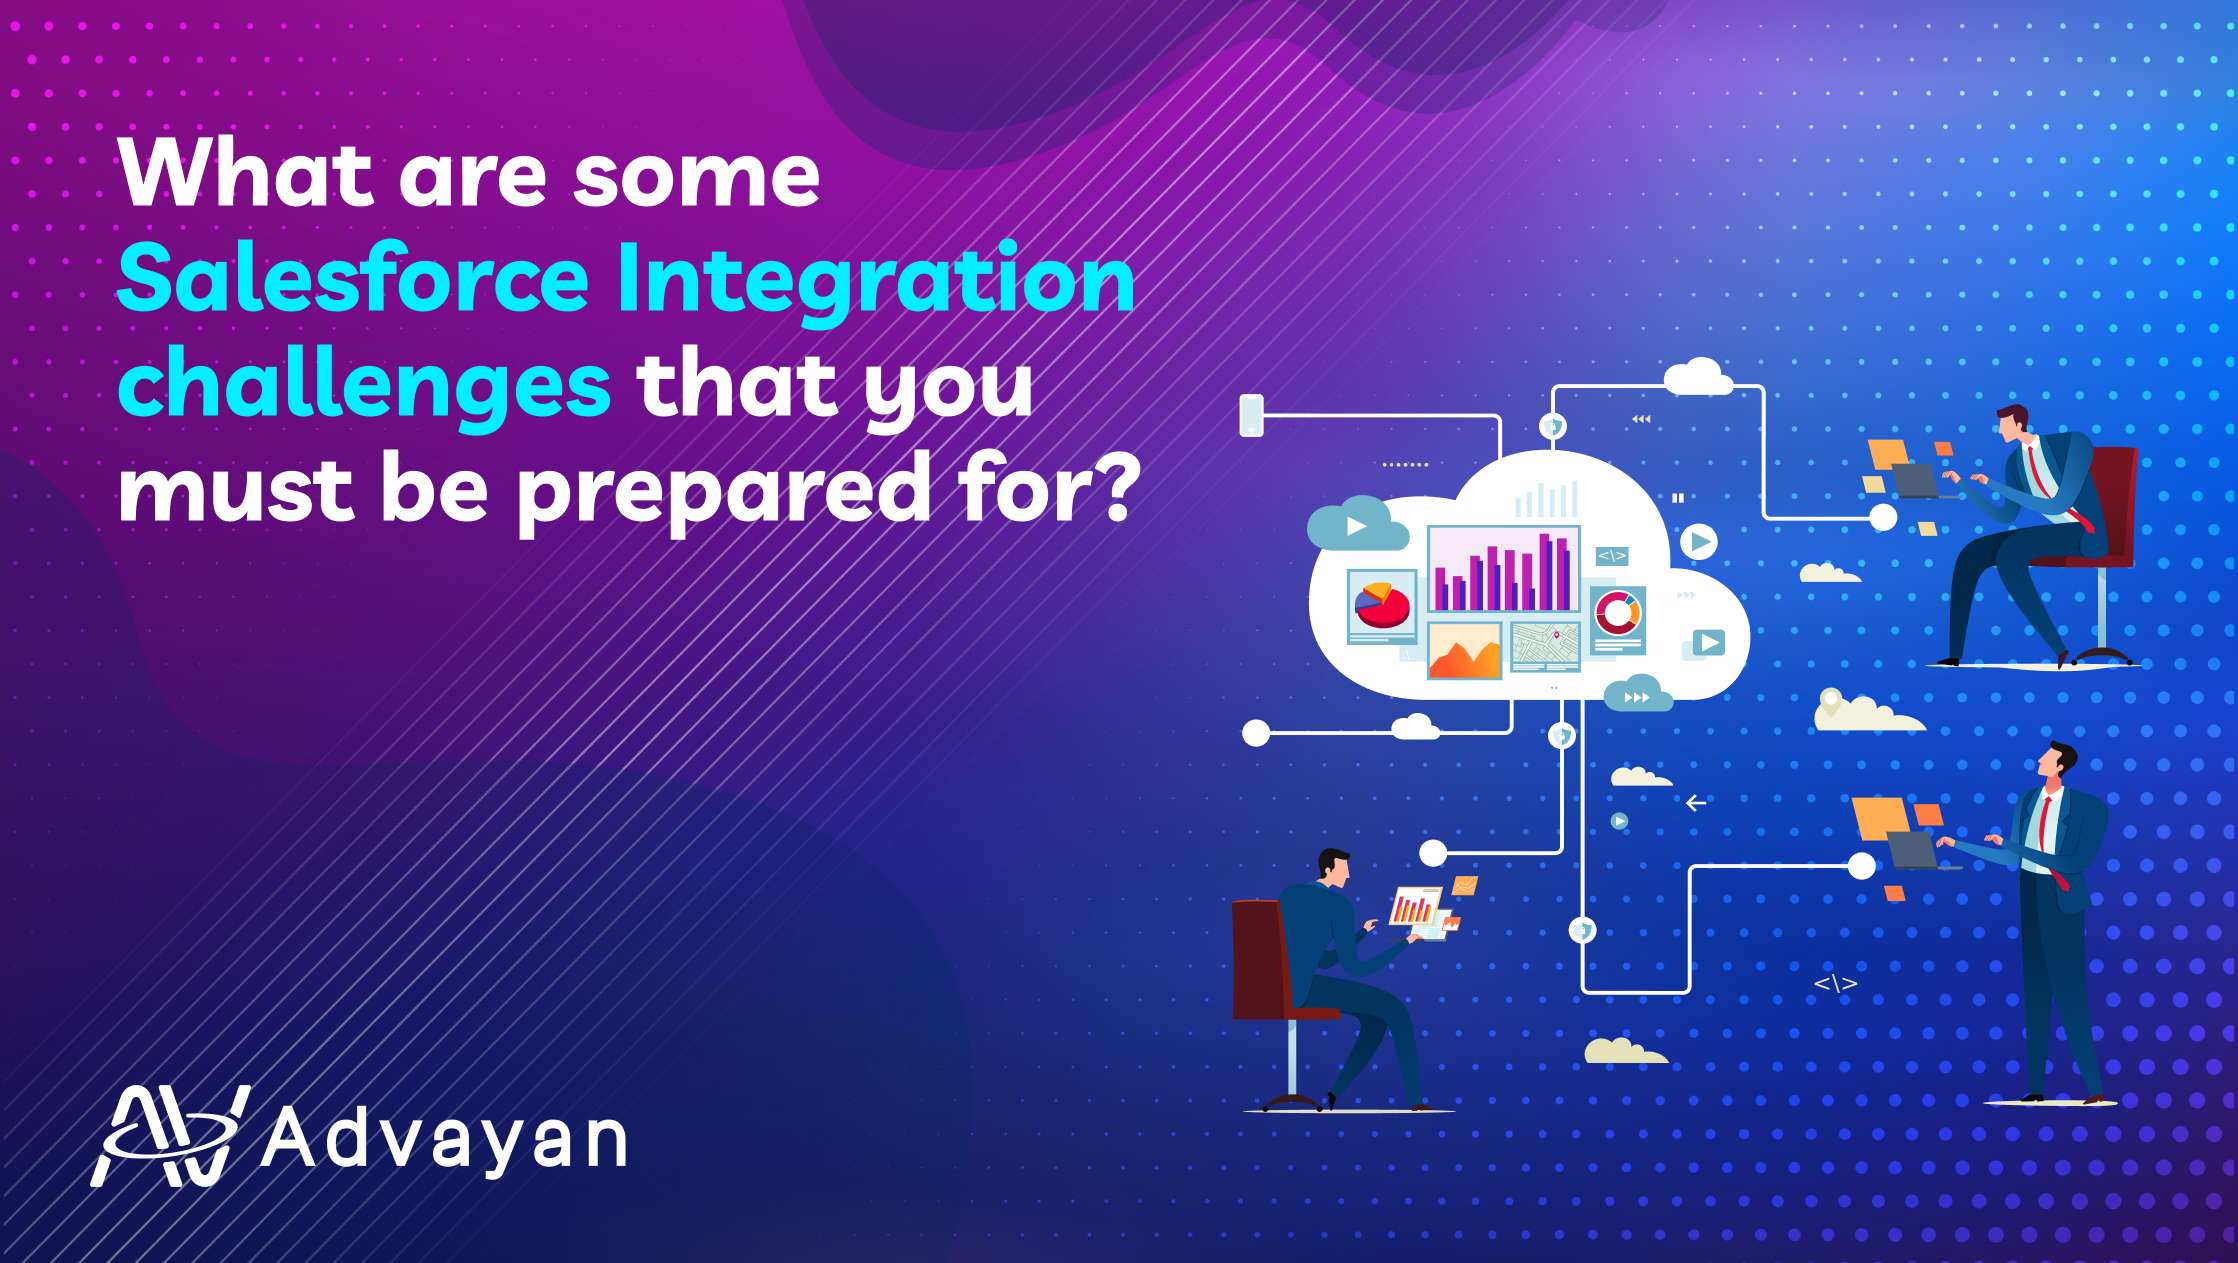 What are some Salesforce integration challenges that you must be prepared for